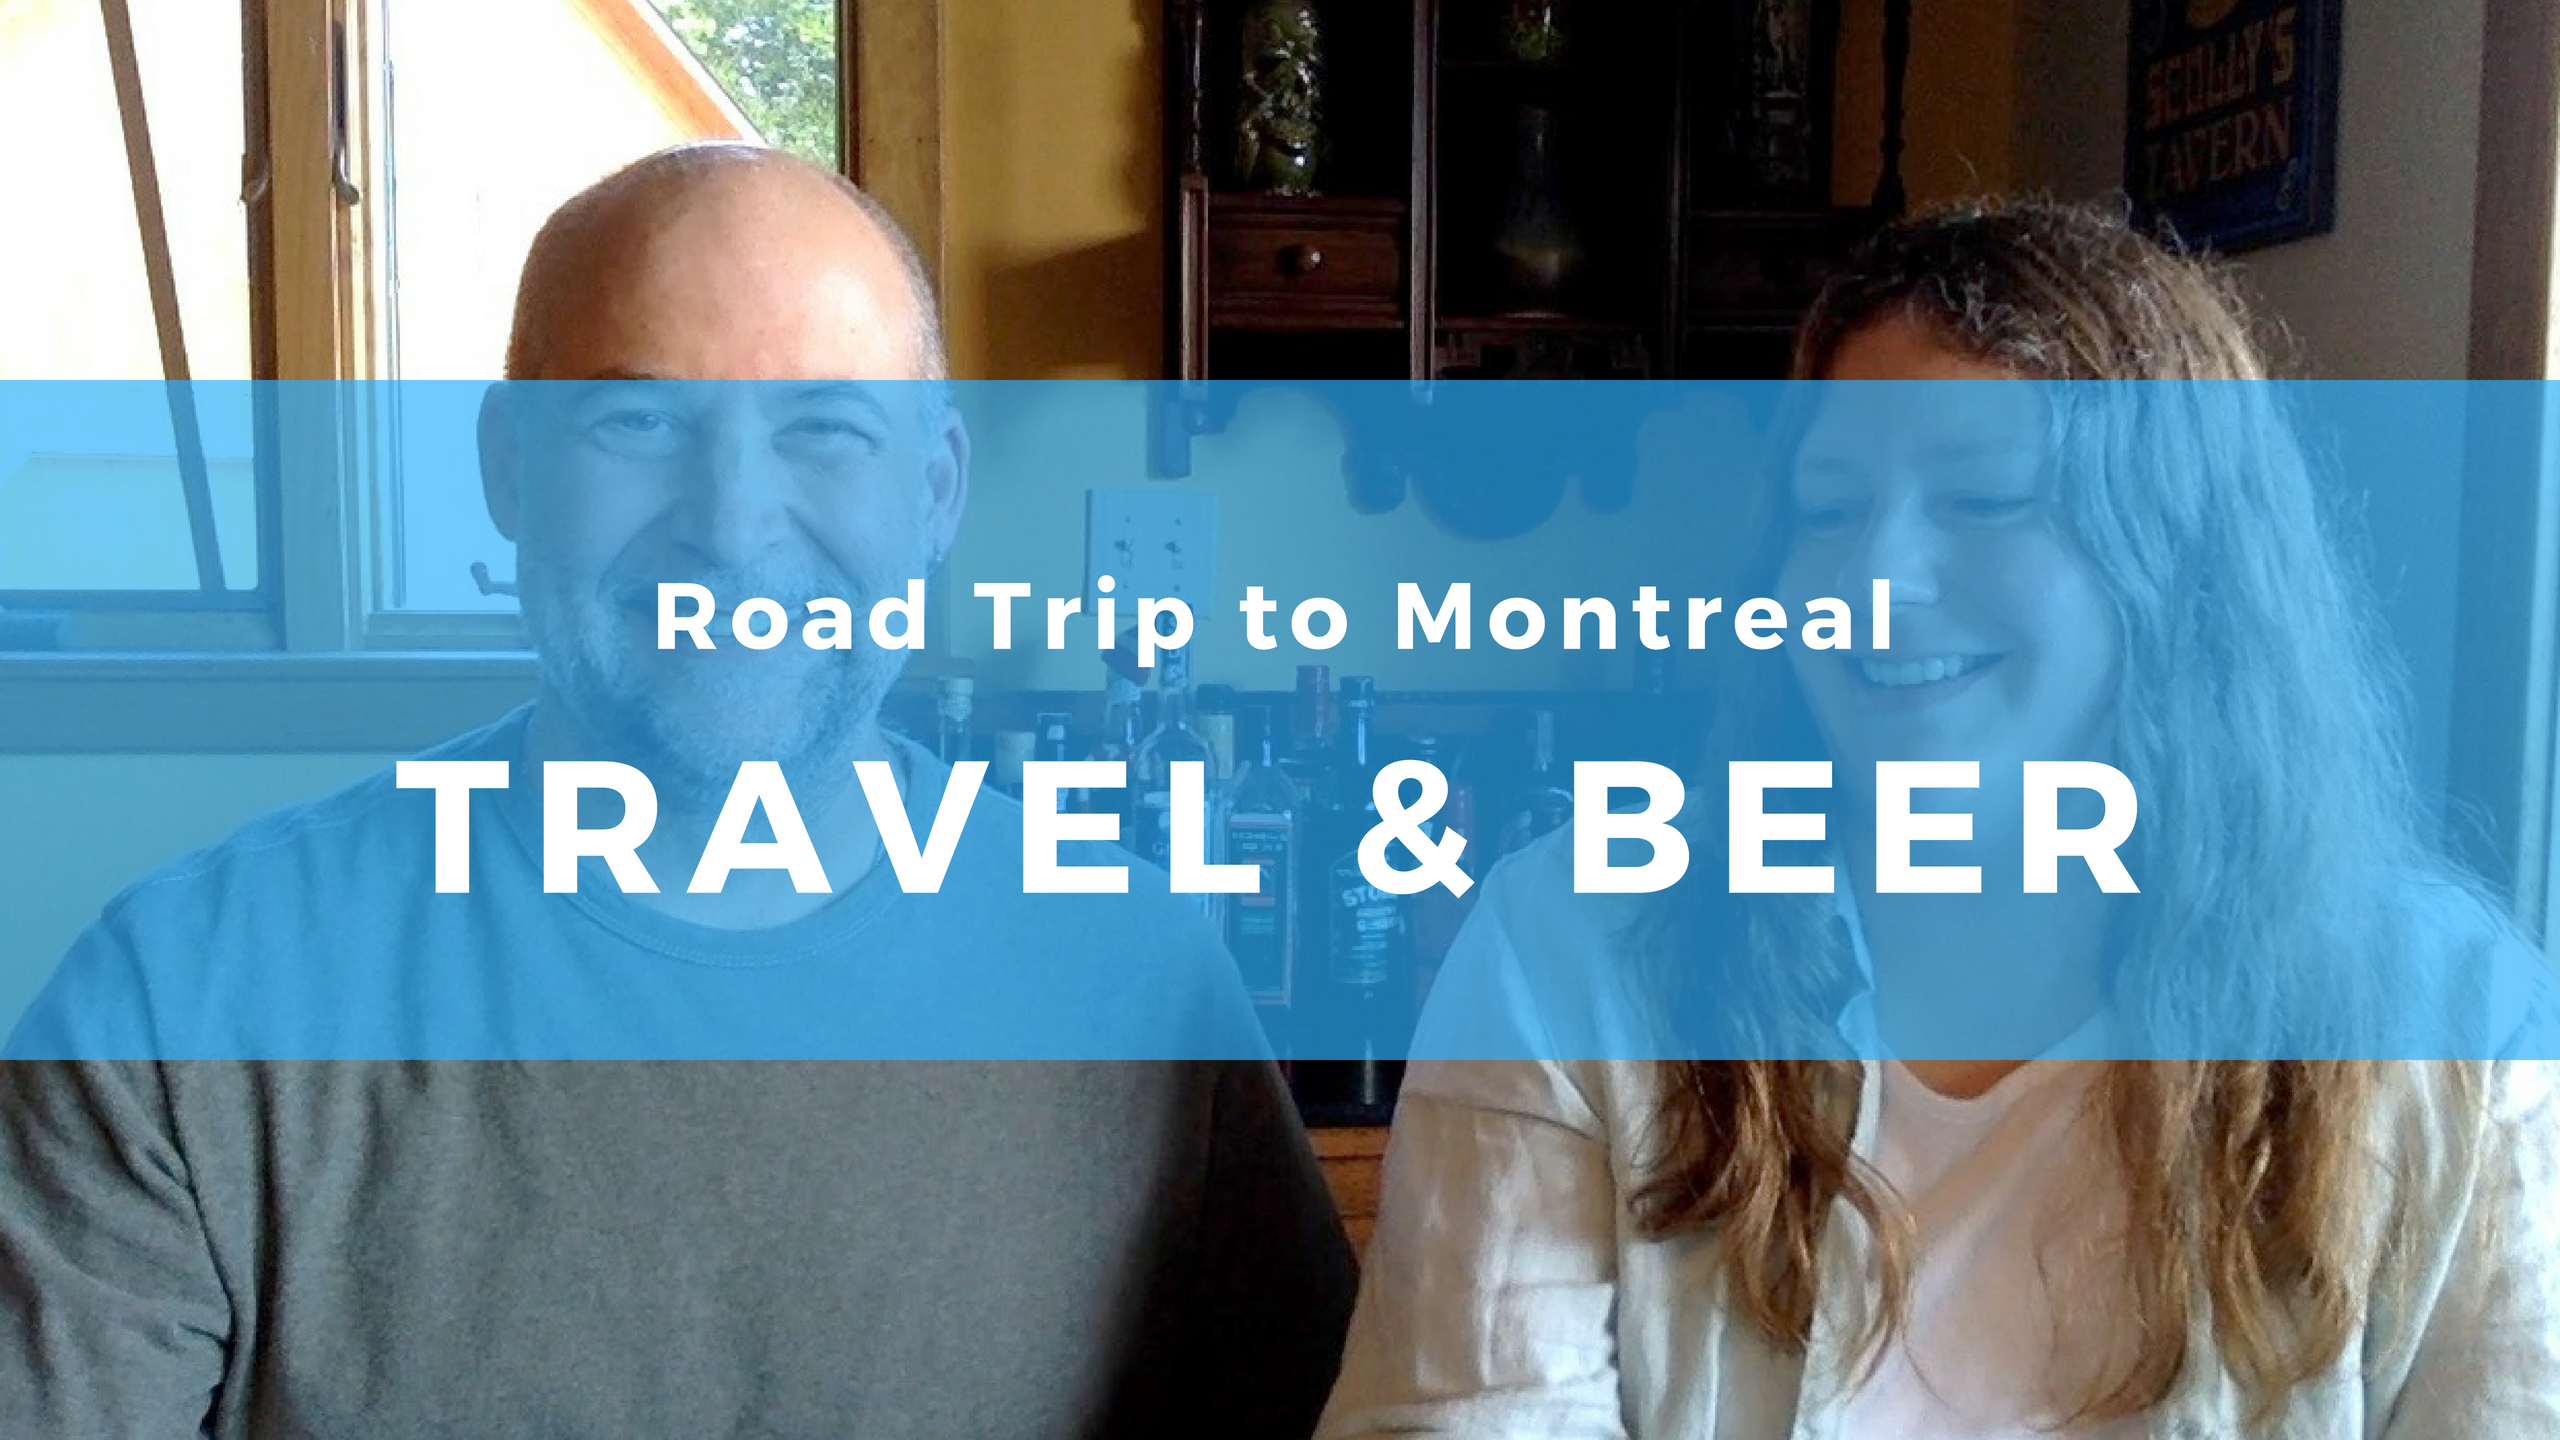 Trip to Montreal